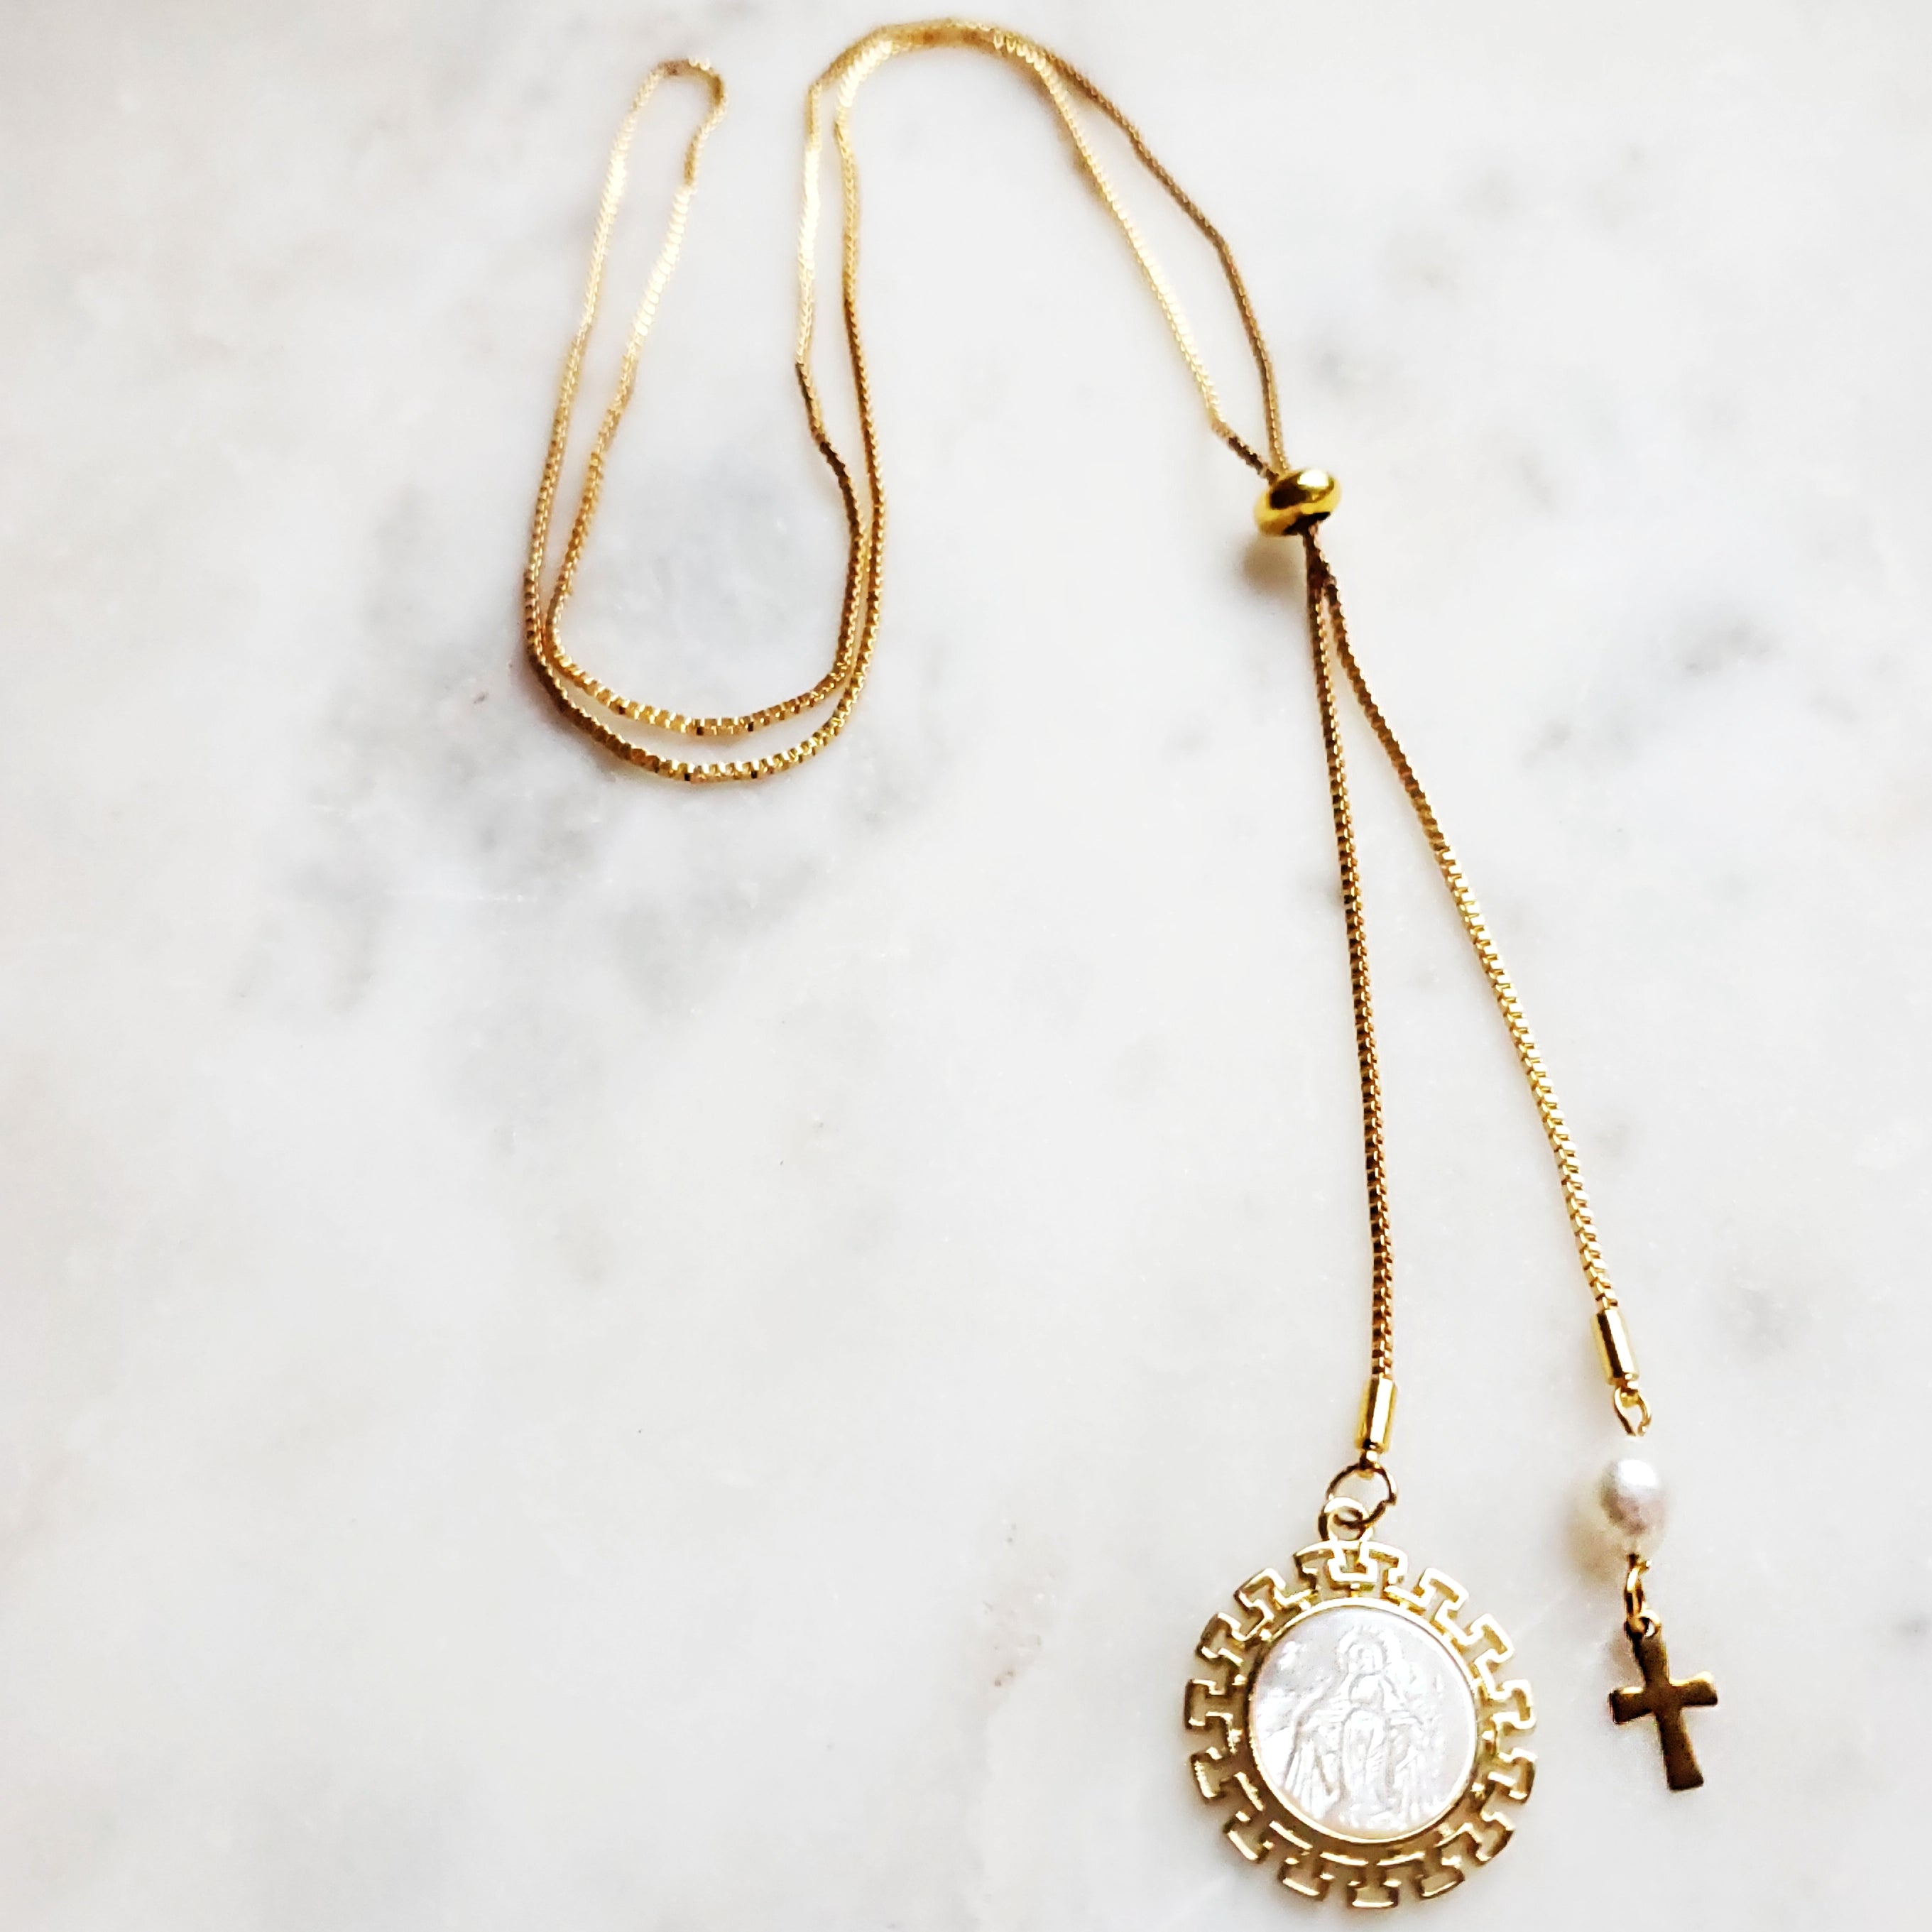 Hope & Glory Necklace (limited)